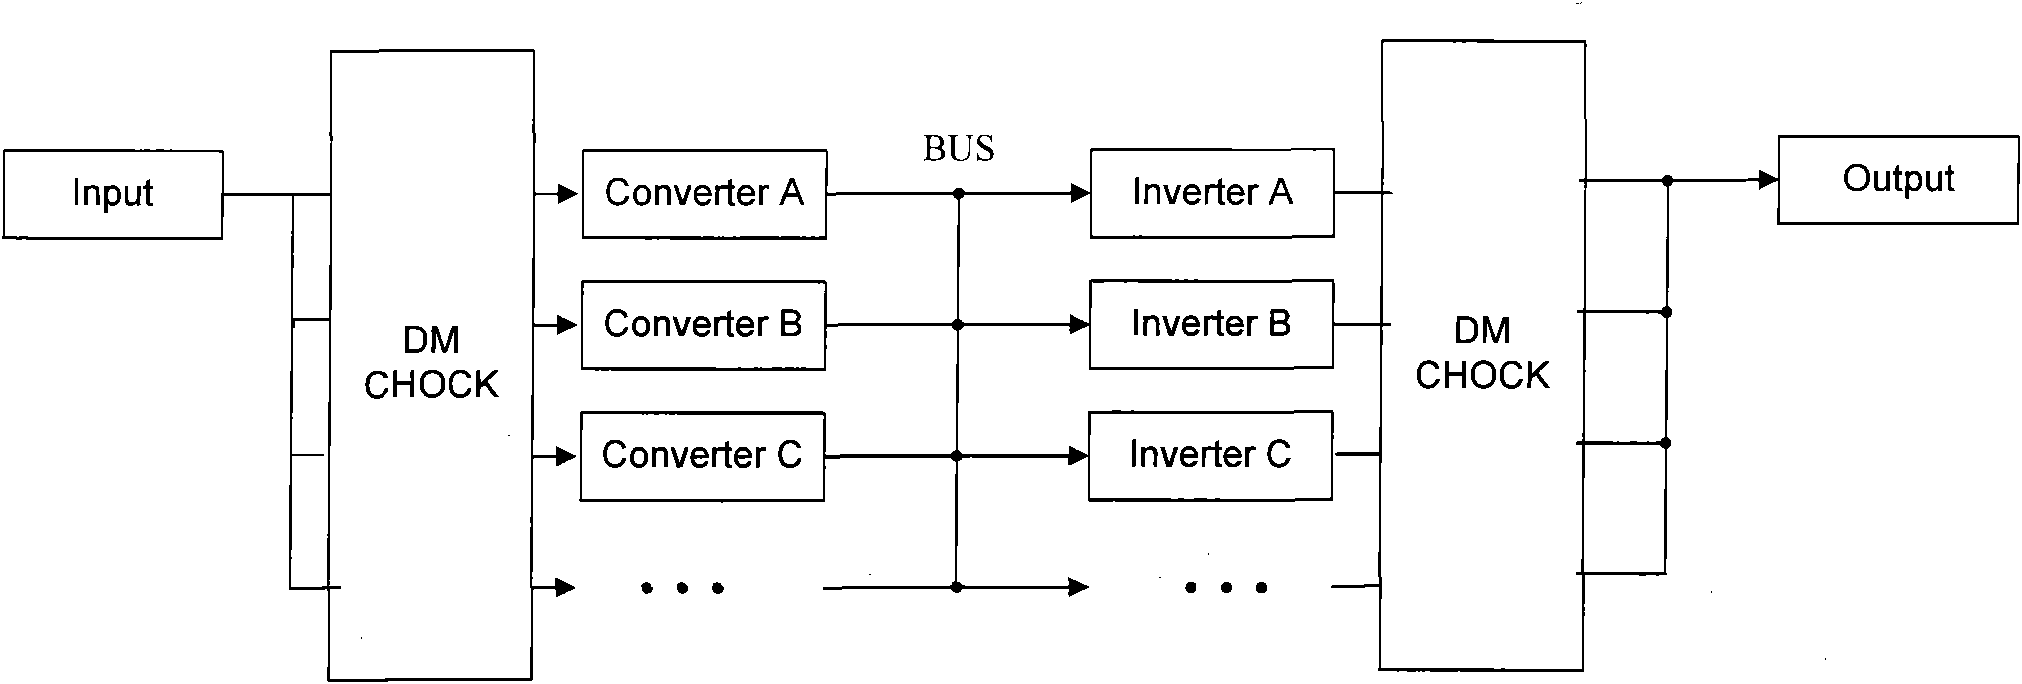 Circuit capable of realizing PFC (Power Factor Correction) flow-equalization parallel connection and control method thereof